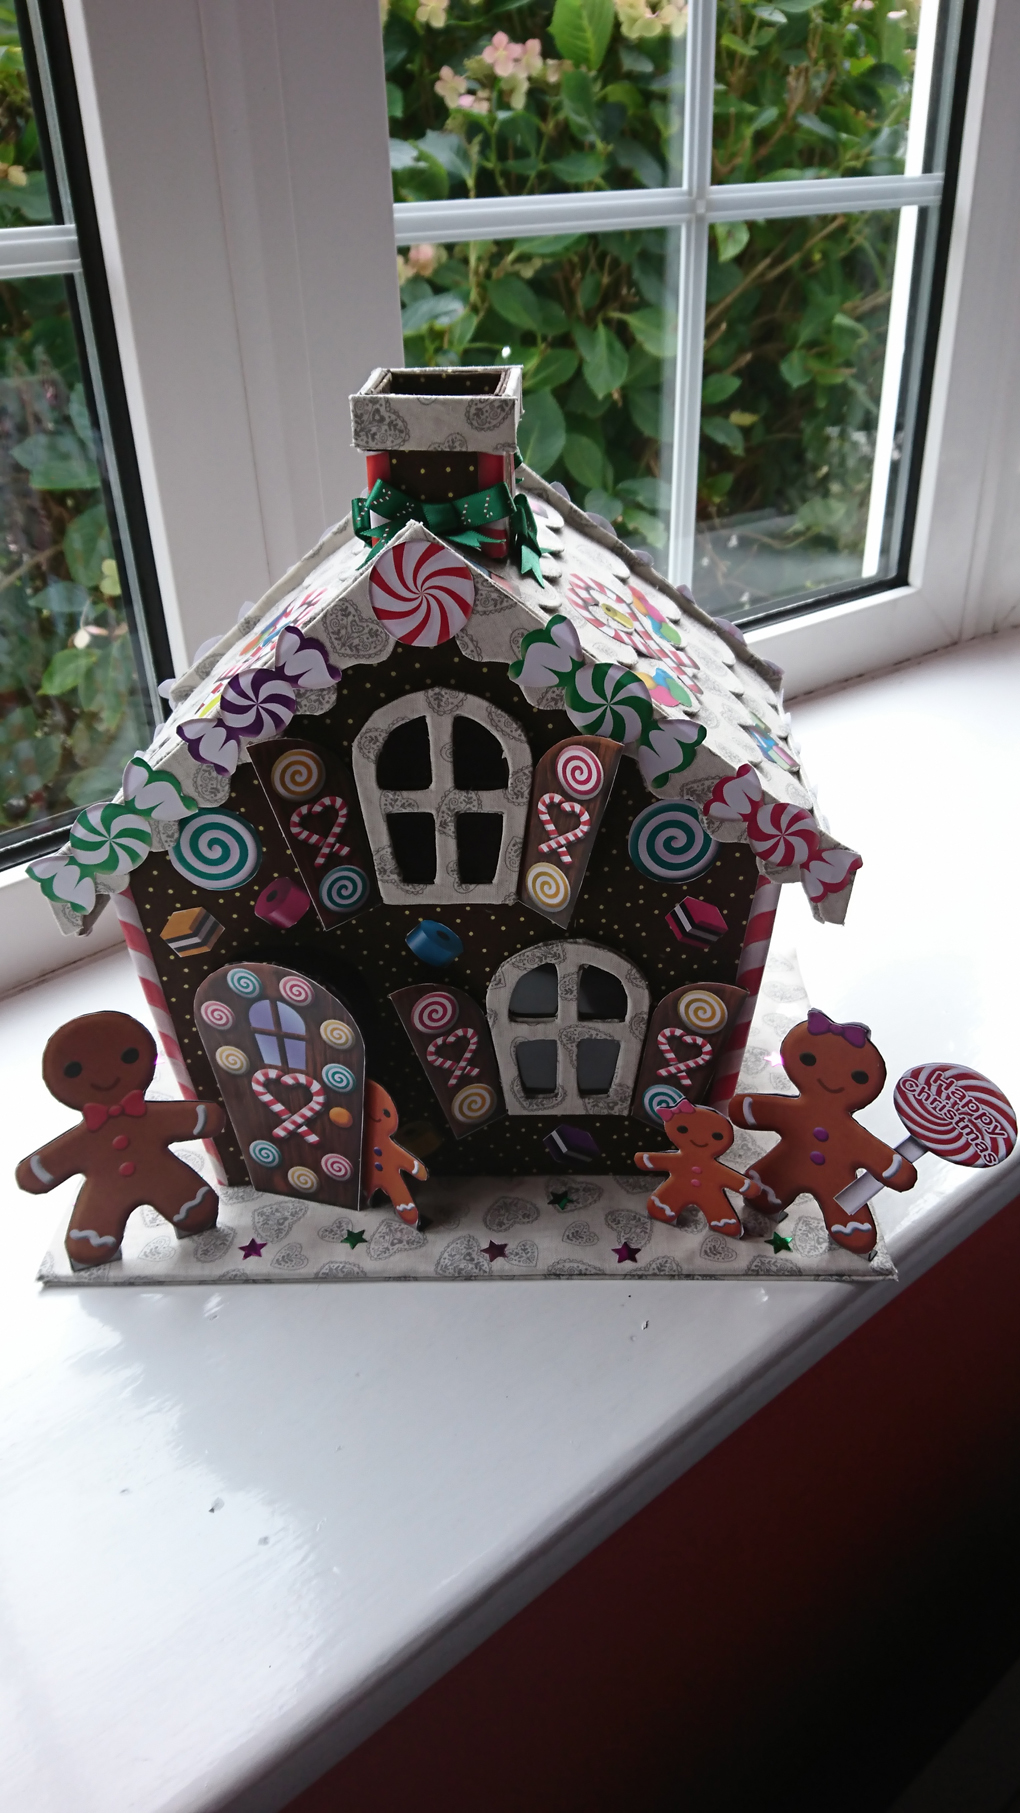 Being stuck at home for two weeks with a virus I made this Gingerbread House fom card covered in two colours of fabric. The Gingerbread family and sweets on house are paper cut outs. It was a kit, a labour oflove